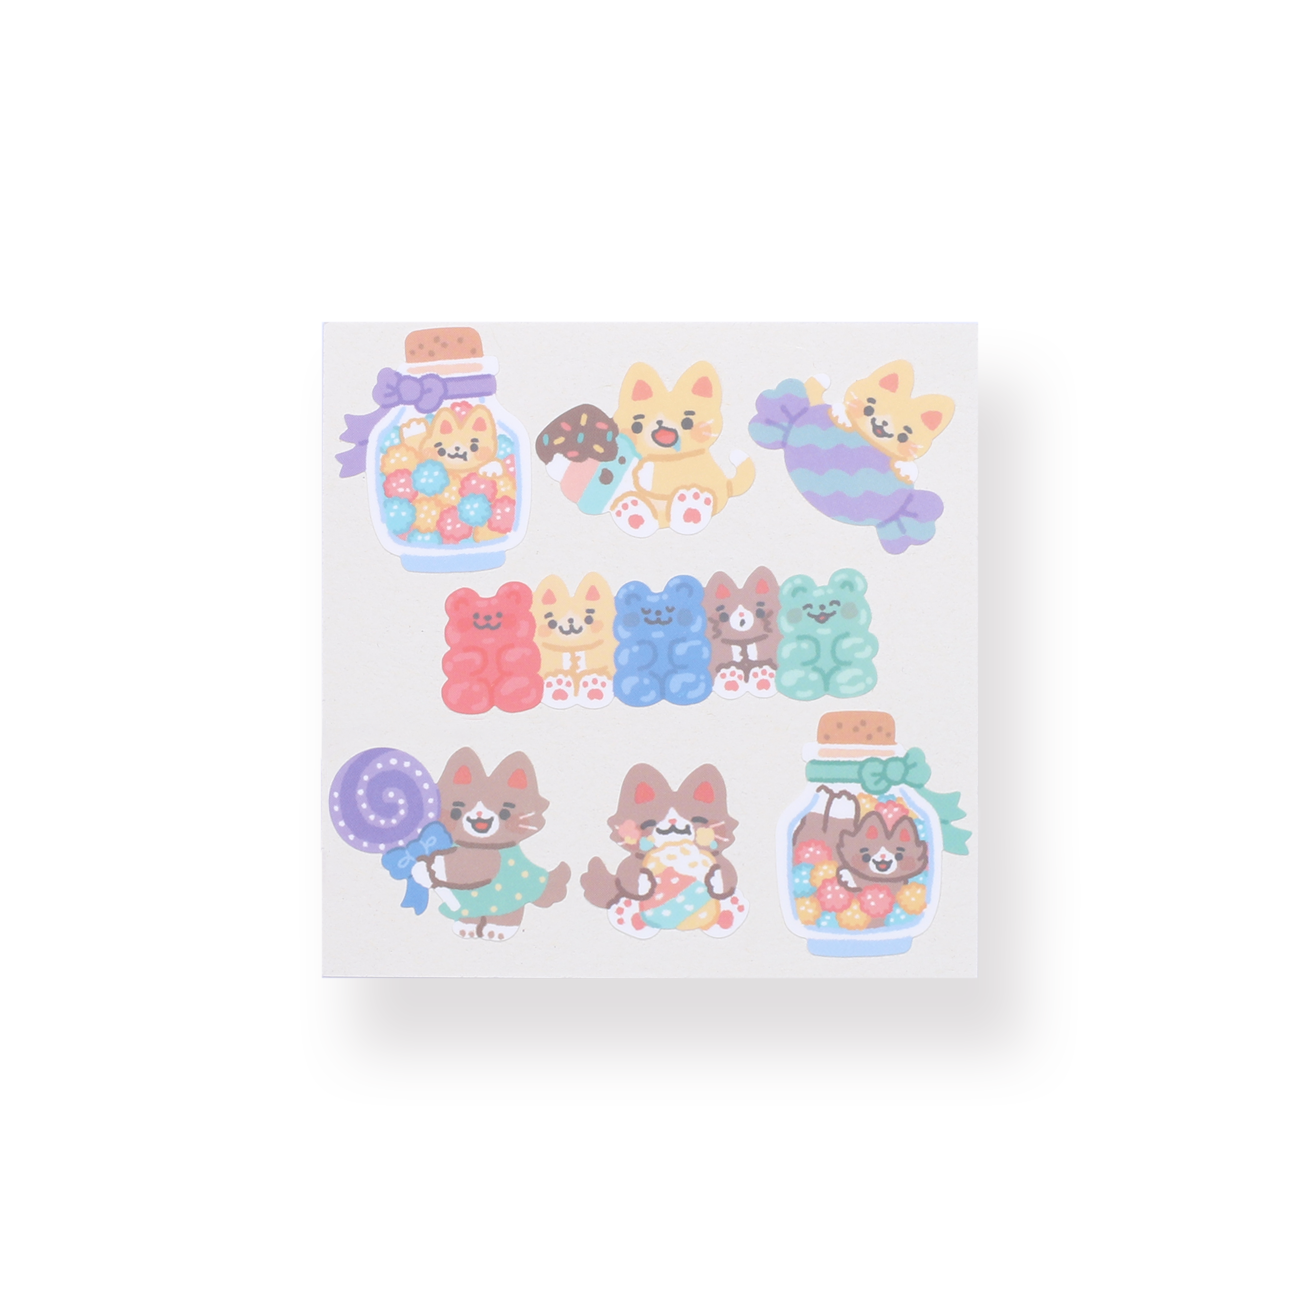 Bonito Candy Store Cats Stickers - Stationery Pal